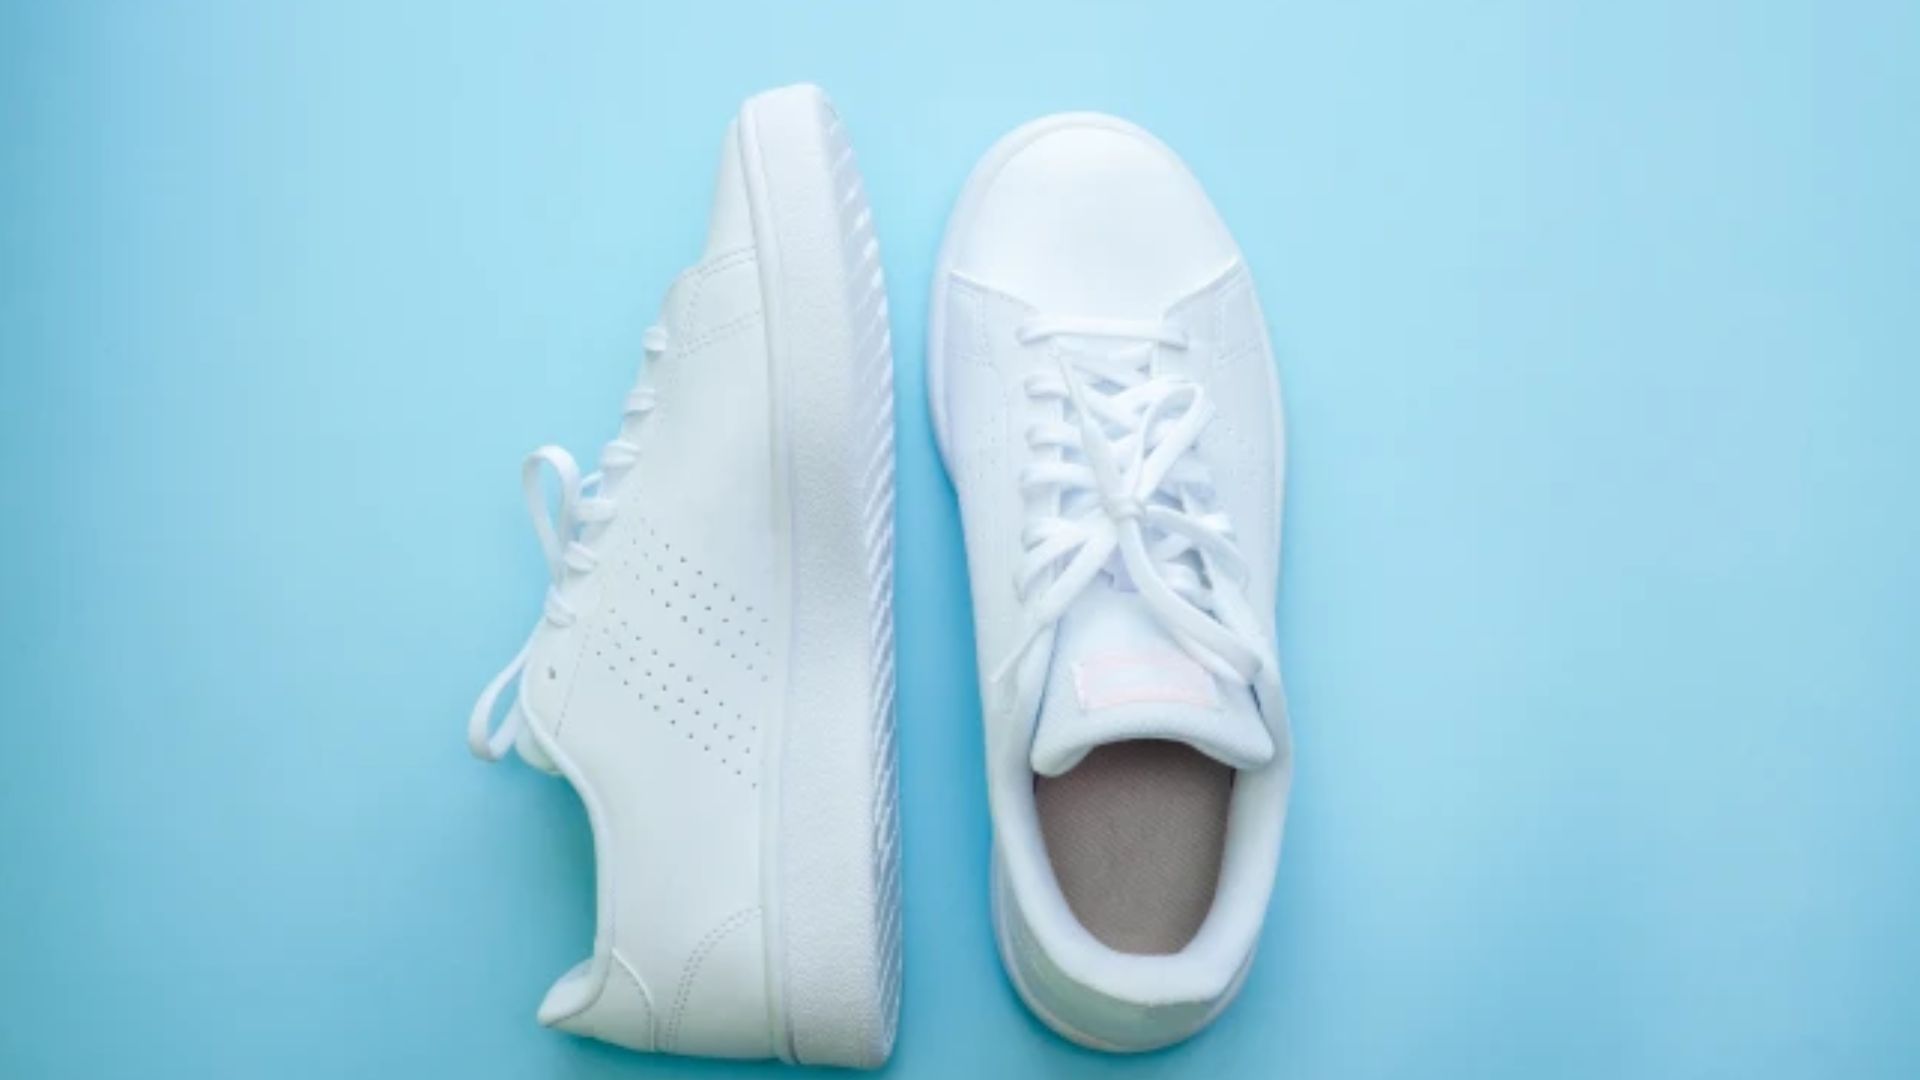 How to clean white trainers